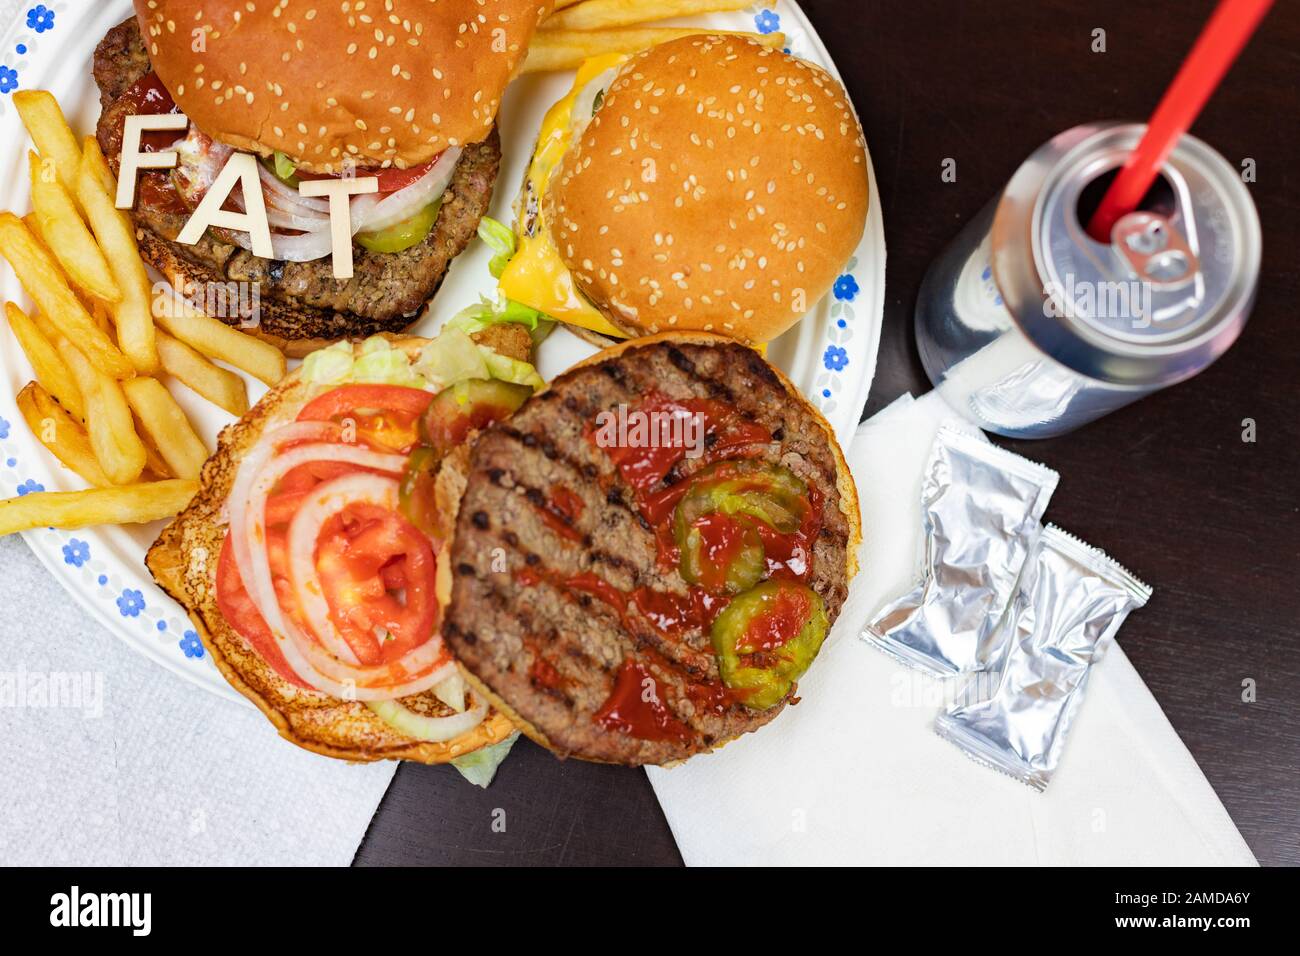 Say No To Junk Food. Juicy burger and fries with word FAT on it. Anti fast food, time for diet concept. Stock Photo